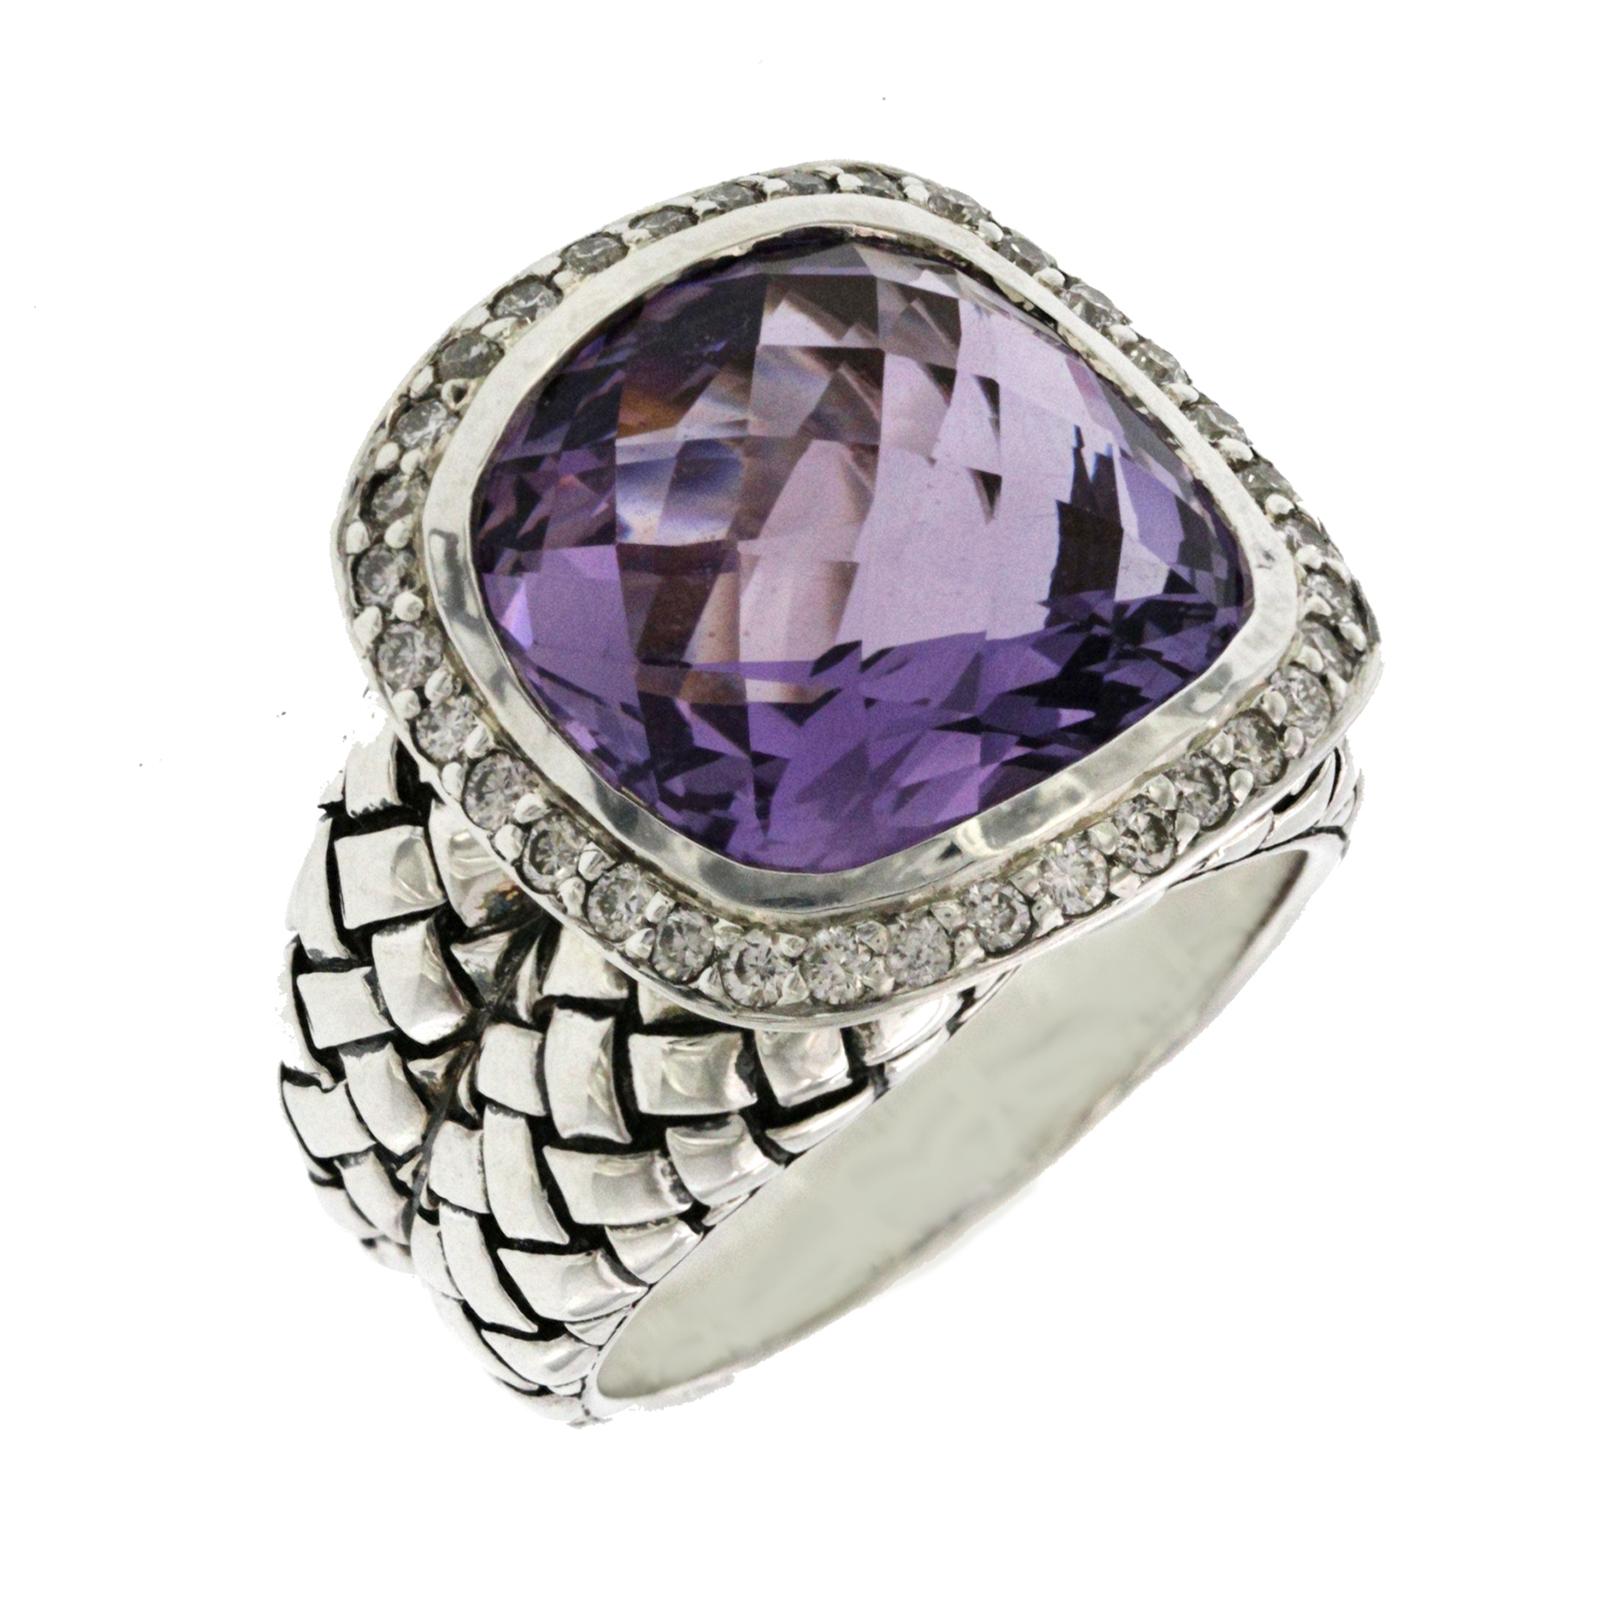 100% Authentic, 100% Customer Satisfaction

Top: 18 mm

Band Width: 6 mm

Metal: 925 Sterlings Silver

Size: 6

Hallmarks:  925 SK

Total Weight: 11.5 Grams

Stone:  Diamonds & Amethyst

Condition: New

Estimated Retail Price: $1500

Stock Number: